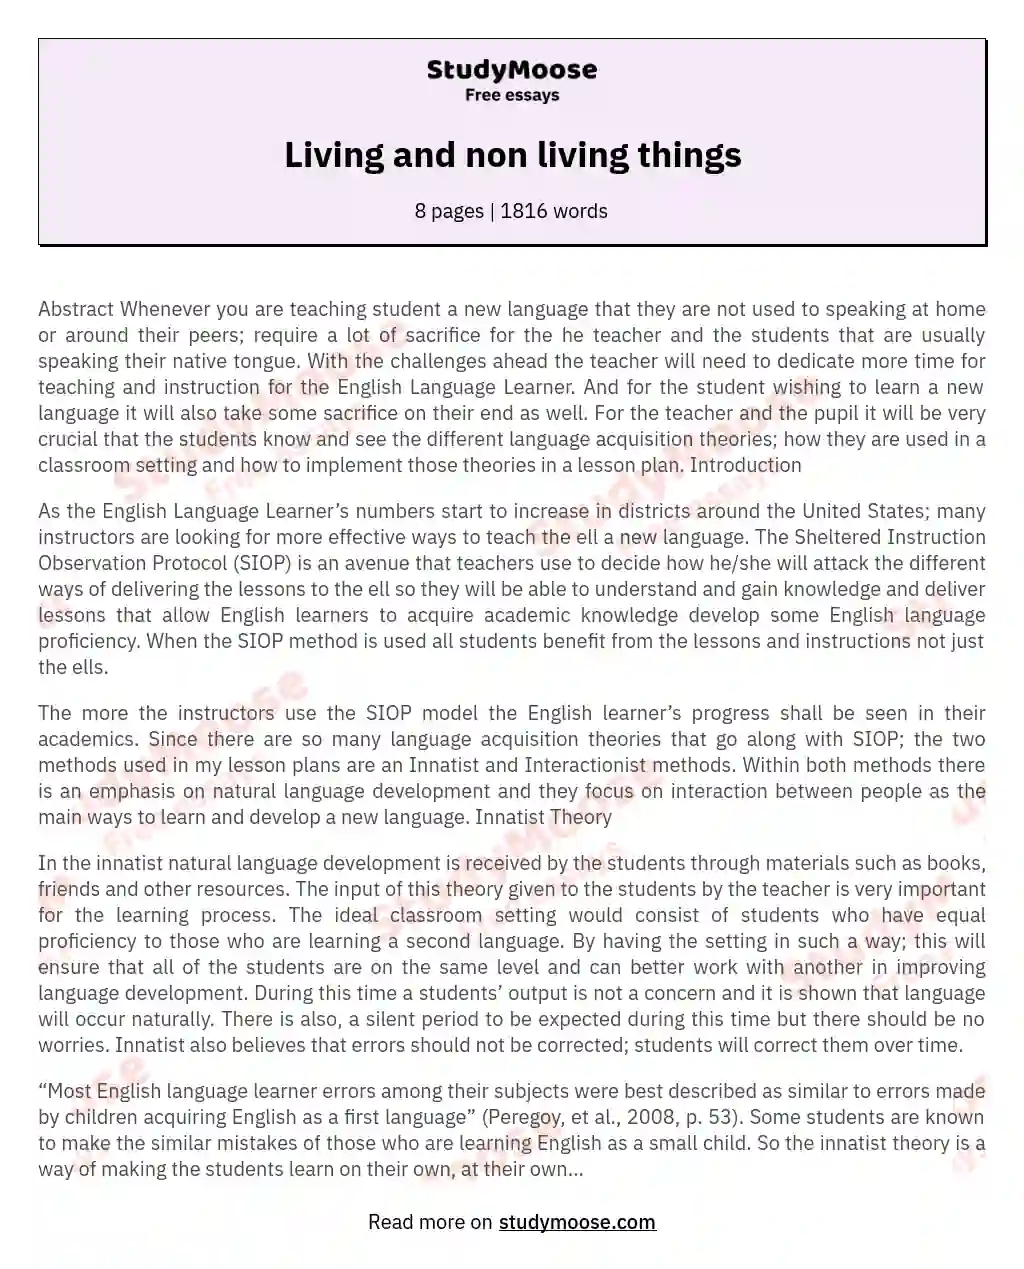 Living and non living things essay